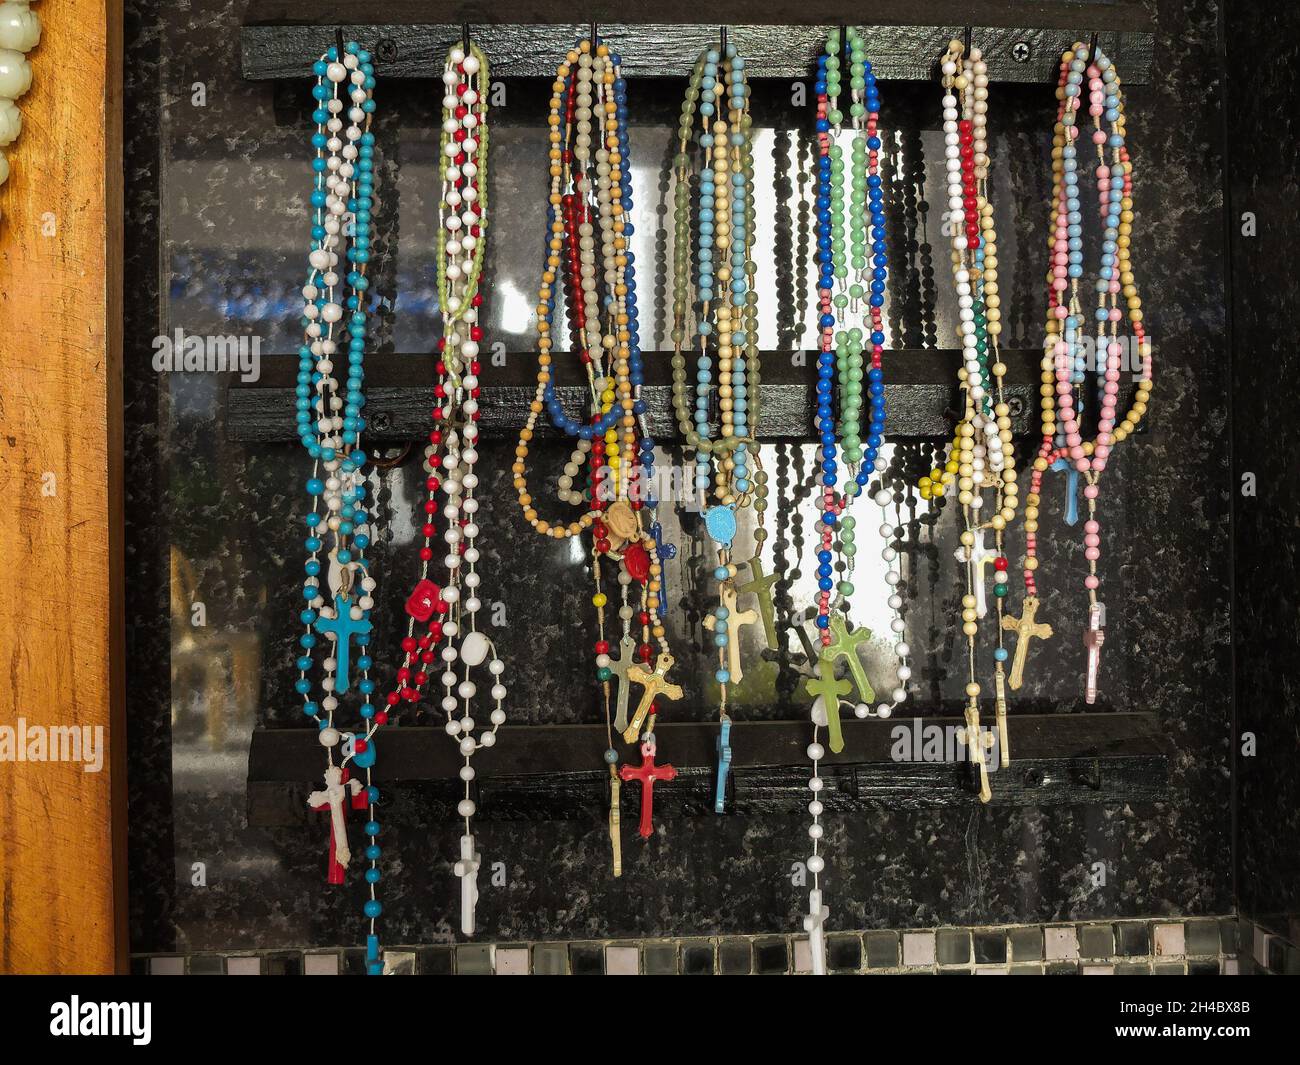 Different colors and varieties of Holy Rosaries hang on a wooden box.The Philippine Government task force against Covid-19 ordered the public and private cemeteries, memorial parks and columbarium throughout the country to be closed from October 29 until November 2 to avoid mass gathering and as prevention for the further spread of the coronavirus infection (Covid-19). Churches in the Philippines will be open to devotees in a limited capacity only to light candles for their dead relatives to ensure all safety protocols and social distancing will be applied. Stock Photo